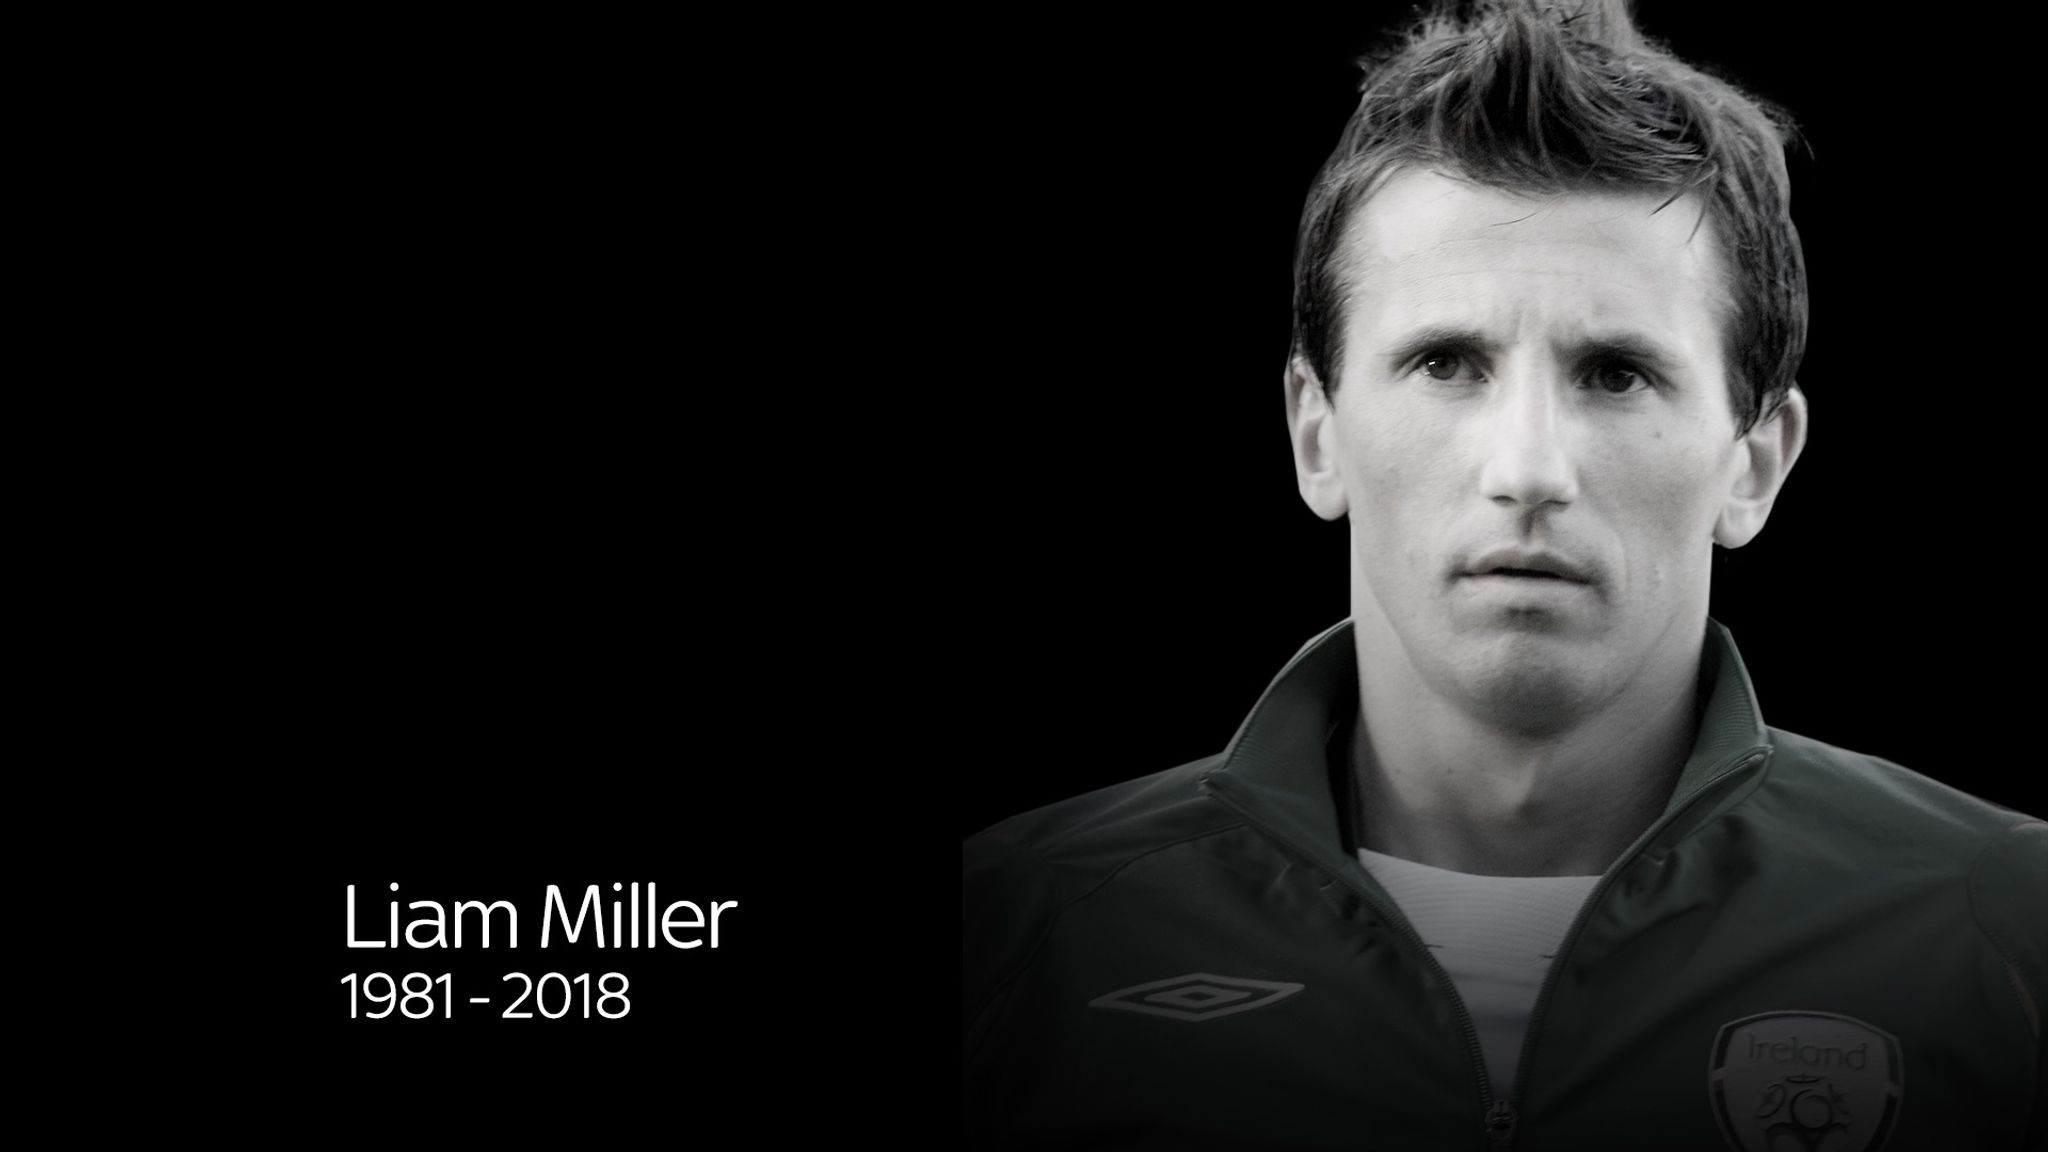 Former Celtic And Manchester United Midfielder Liam Miller Dies Aged 36 Football News Sky Sports